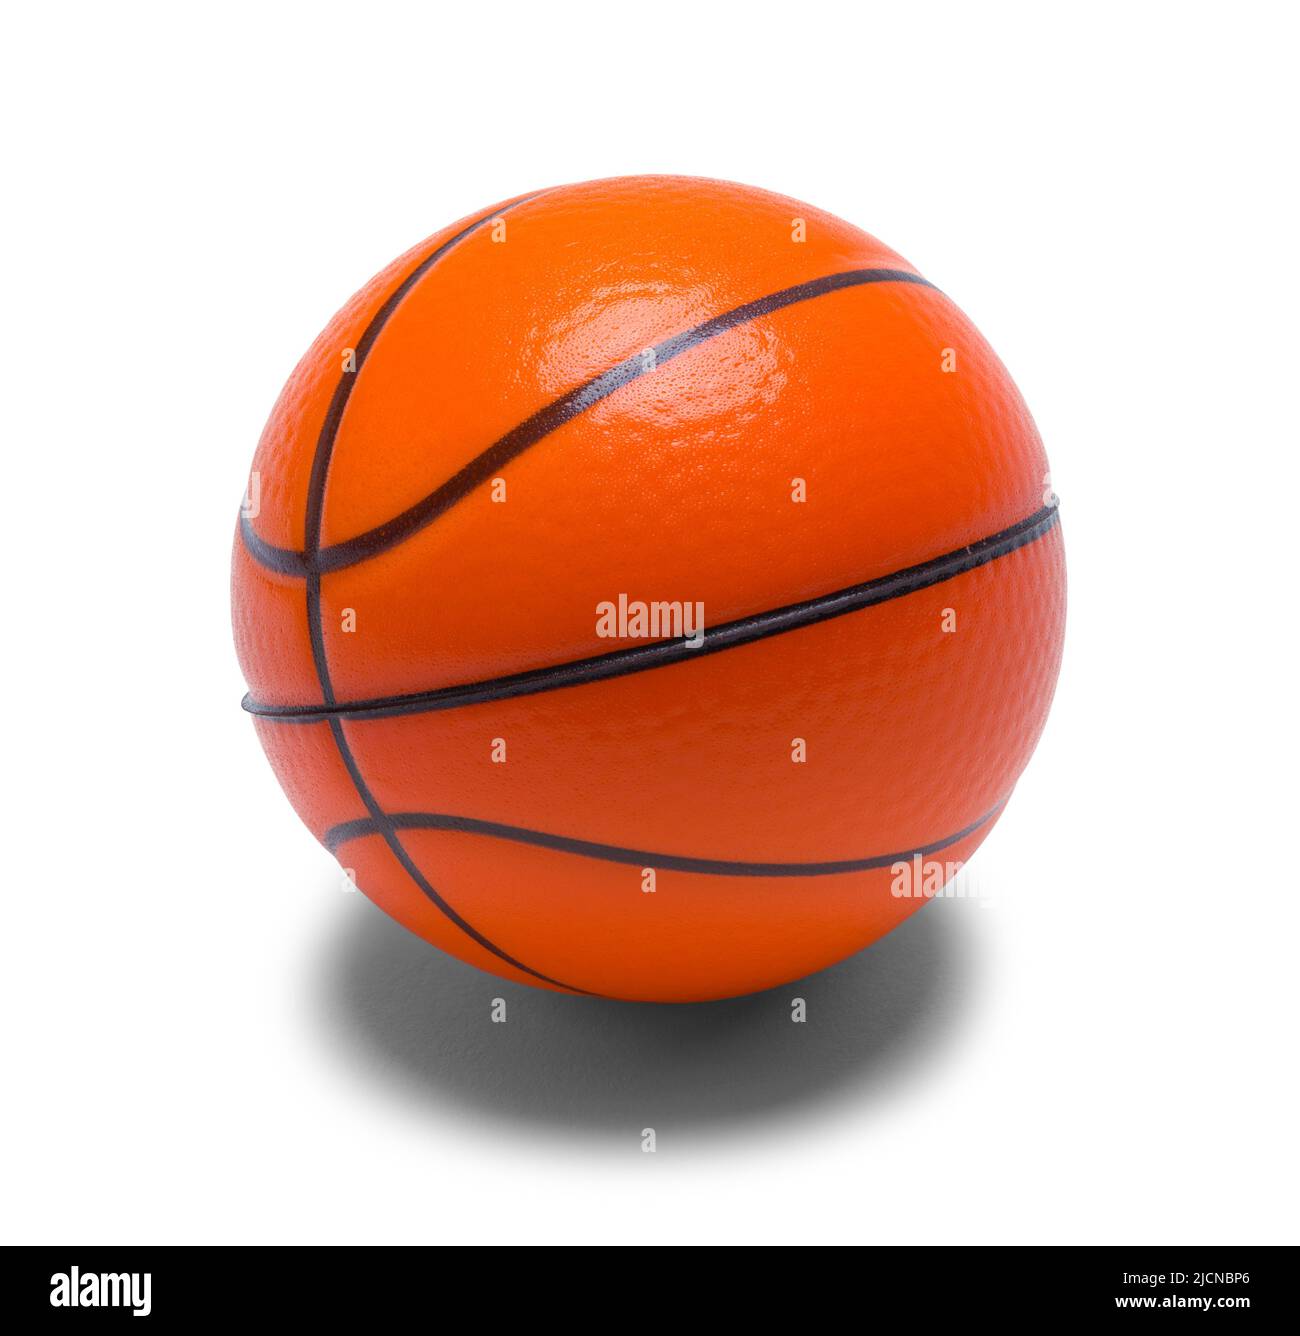 Tiny Toy Basketball Cut Out on White. Stock Photo